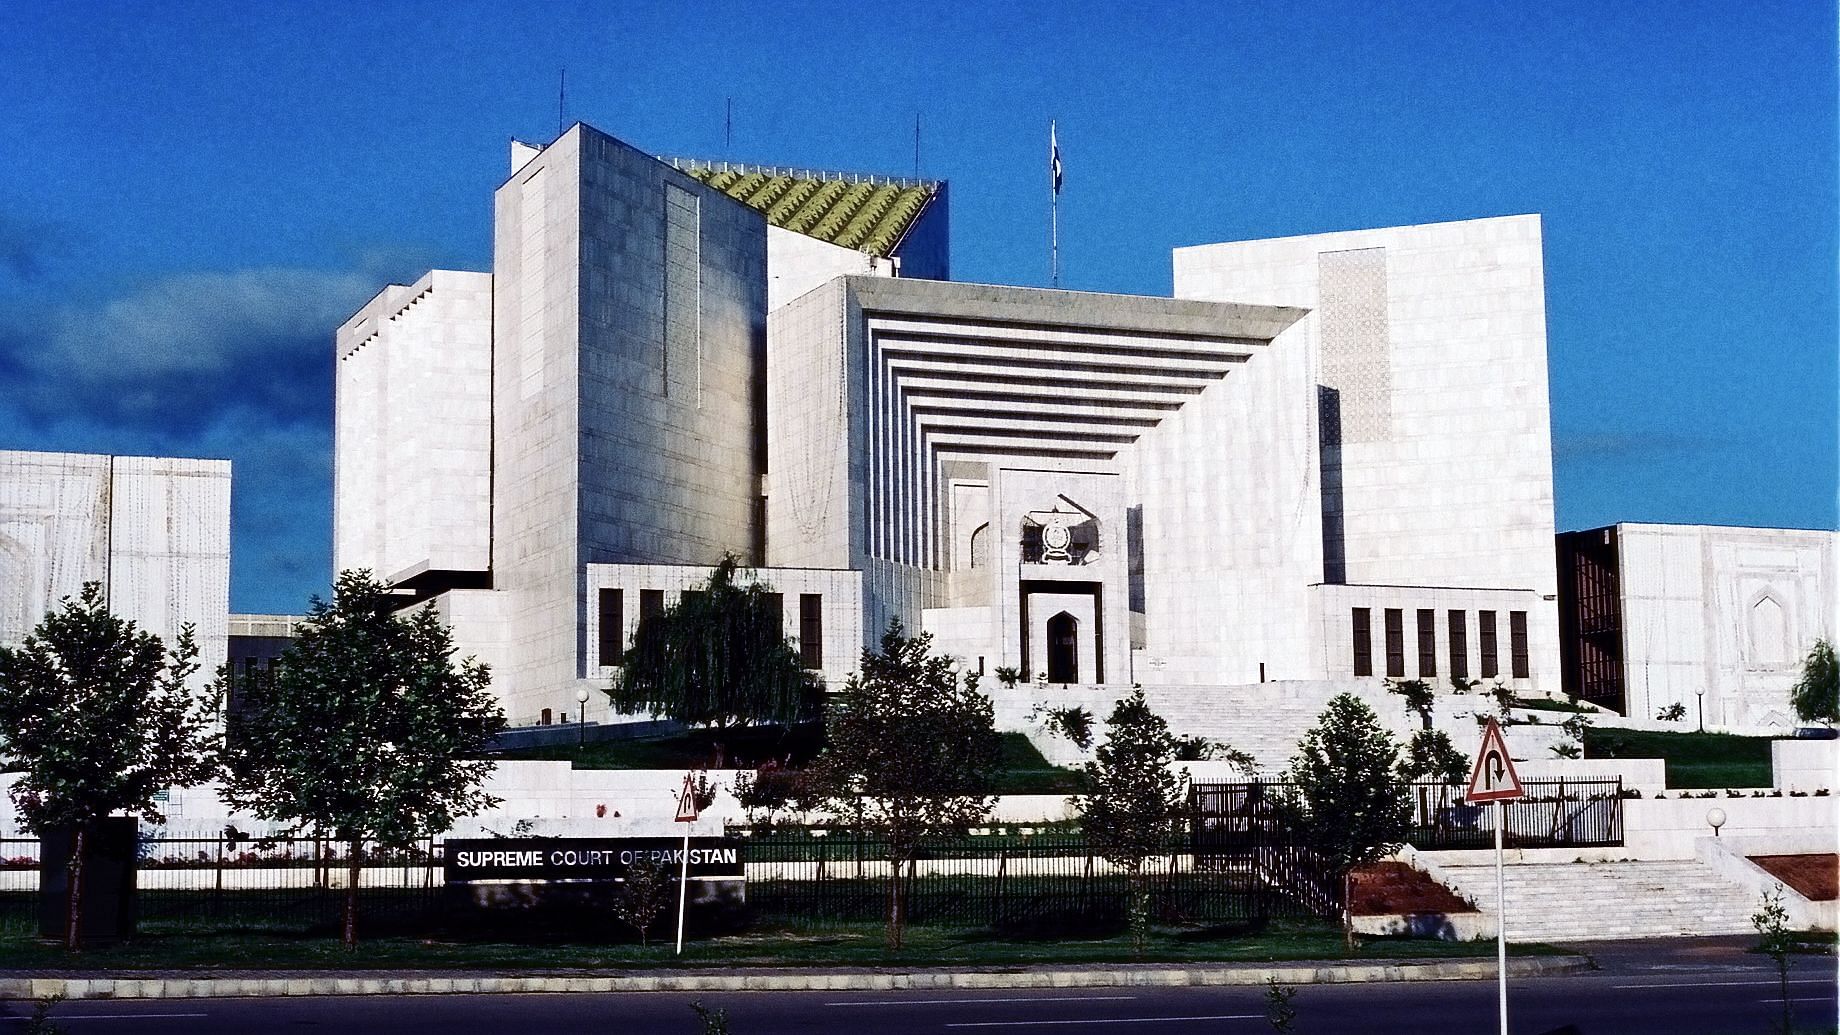 Photo of Supreme Court of Pakistan used for representation.